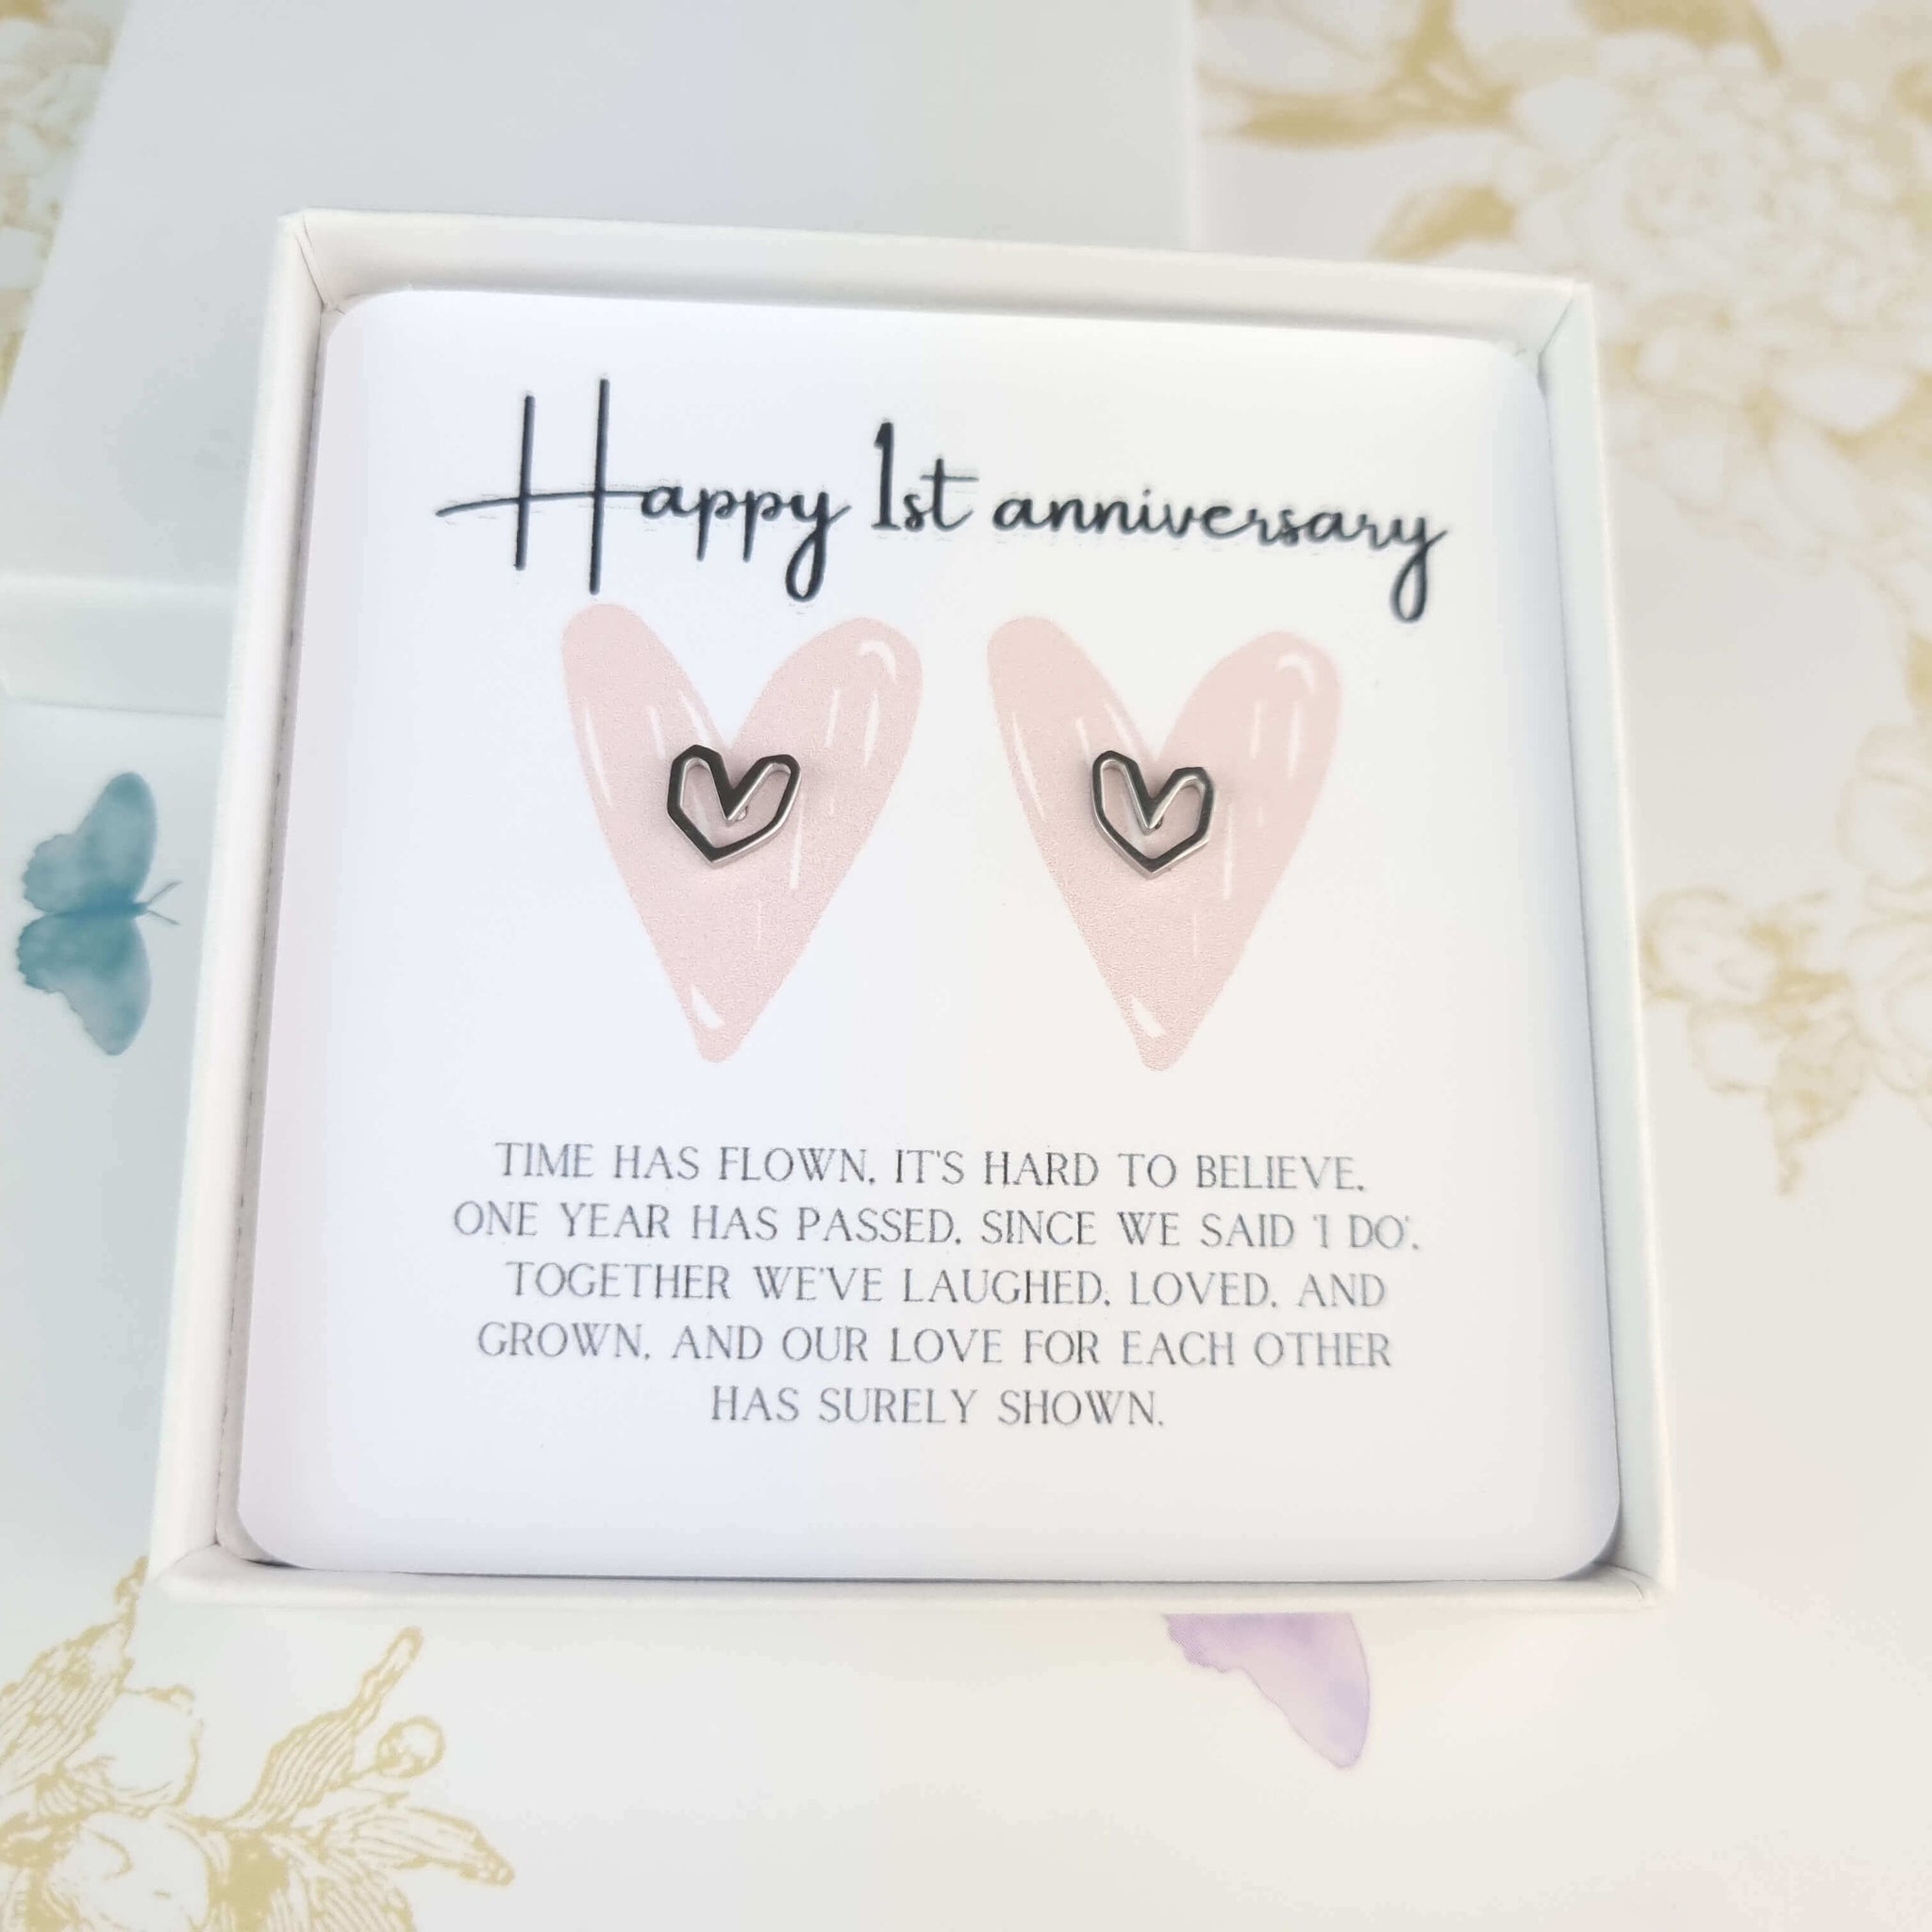 happy 1st anniversary card with poem and a pair of heart stud earrings